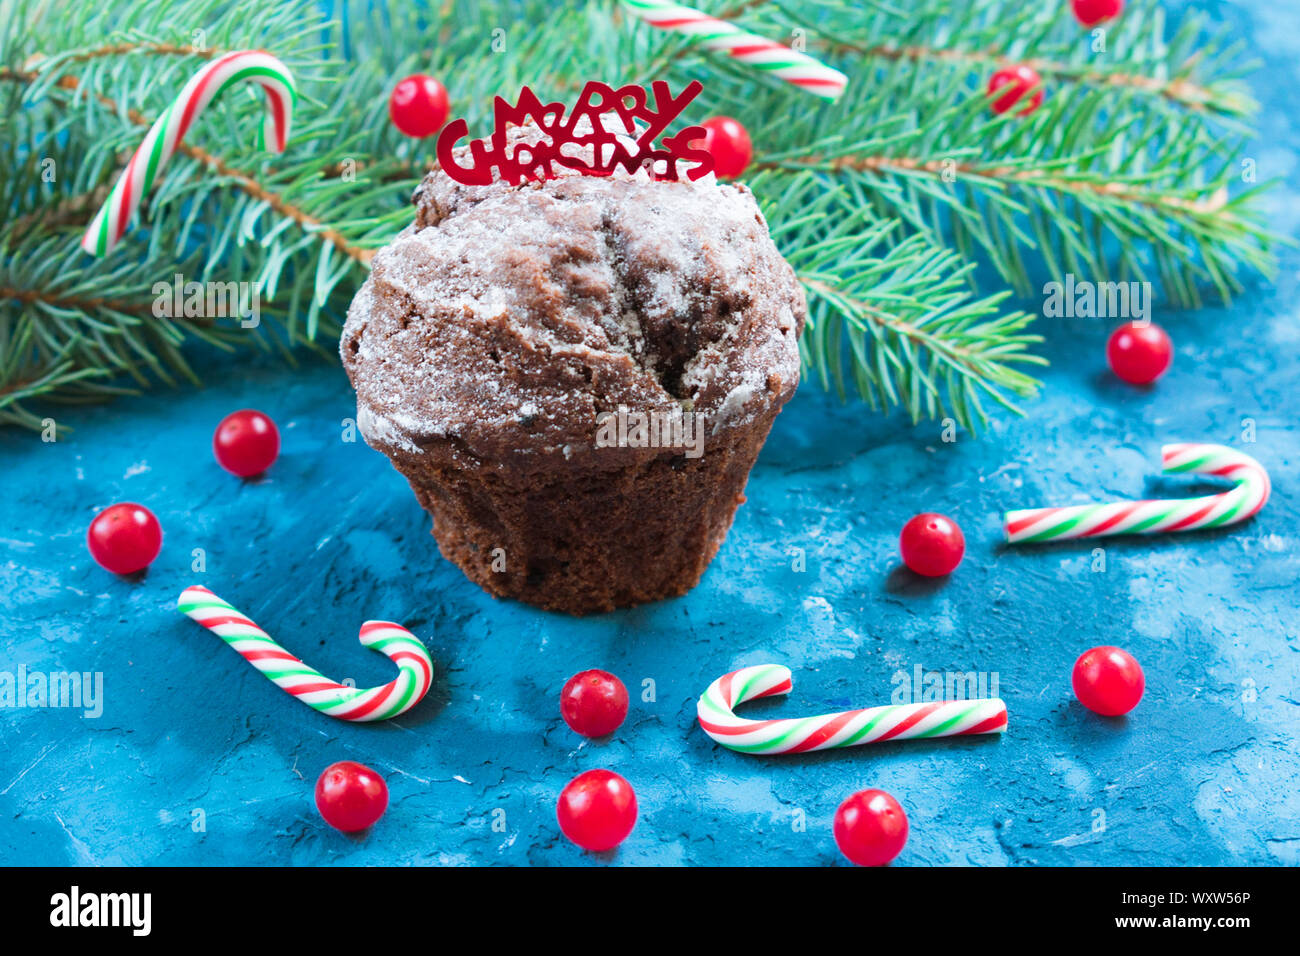 Christmas homemade chocolate muffin decorated with red berries and sweets on the background of a Christmas tree branch. Stock Photo